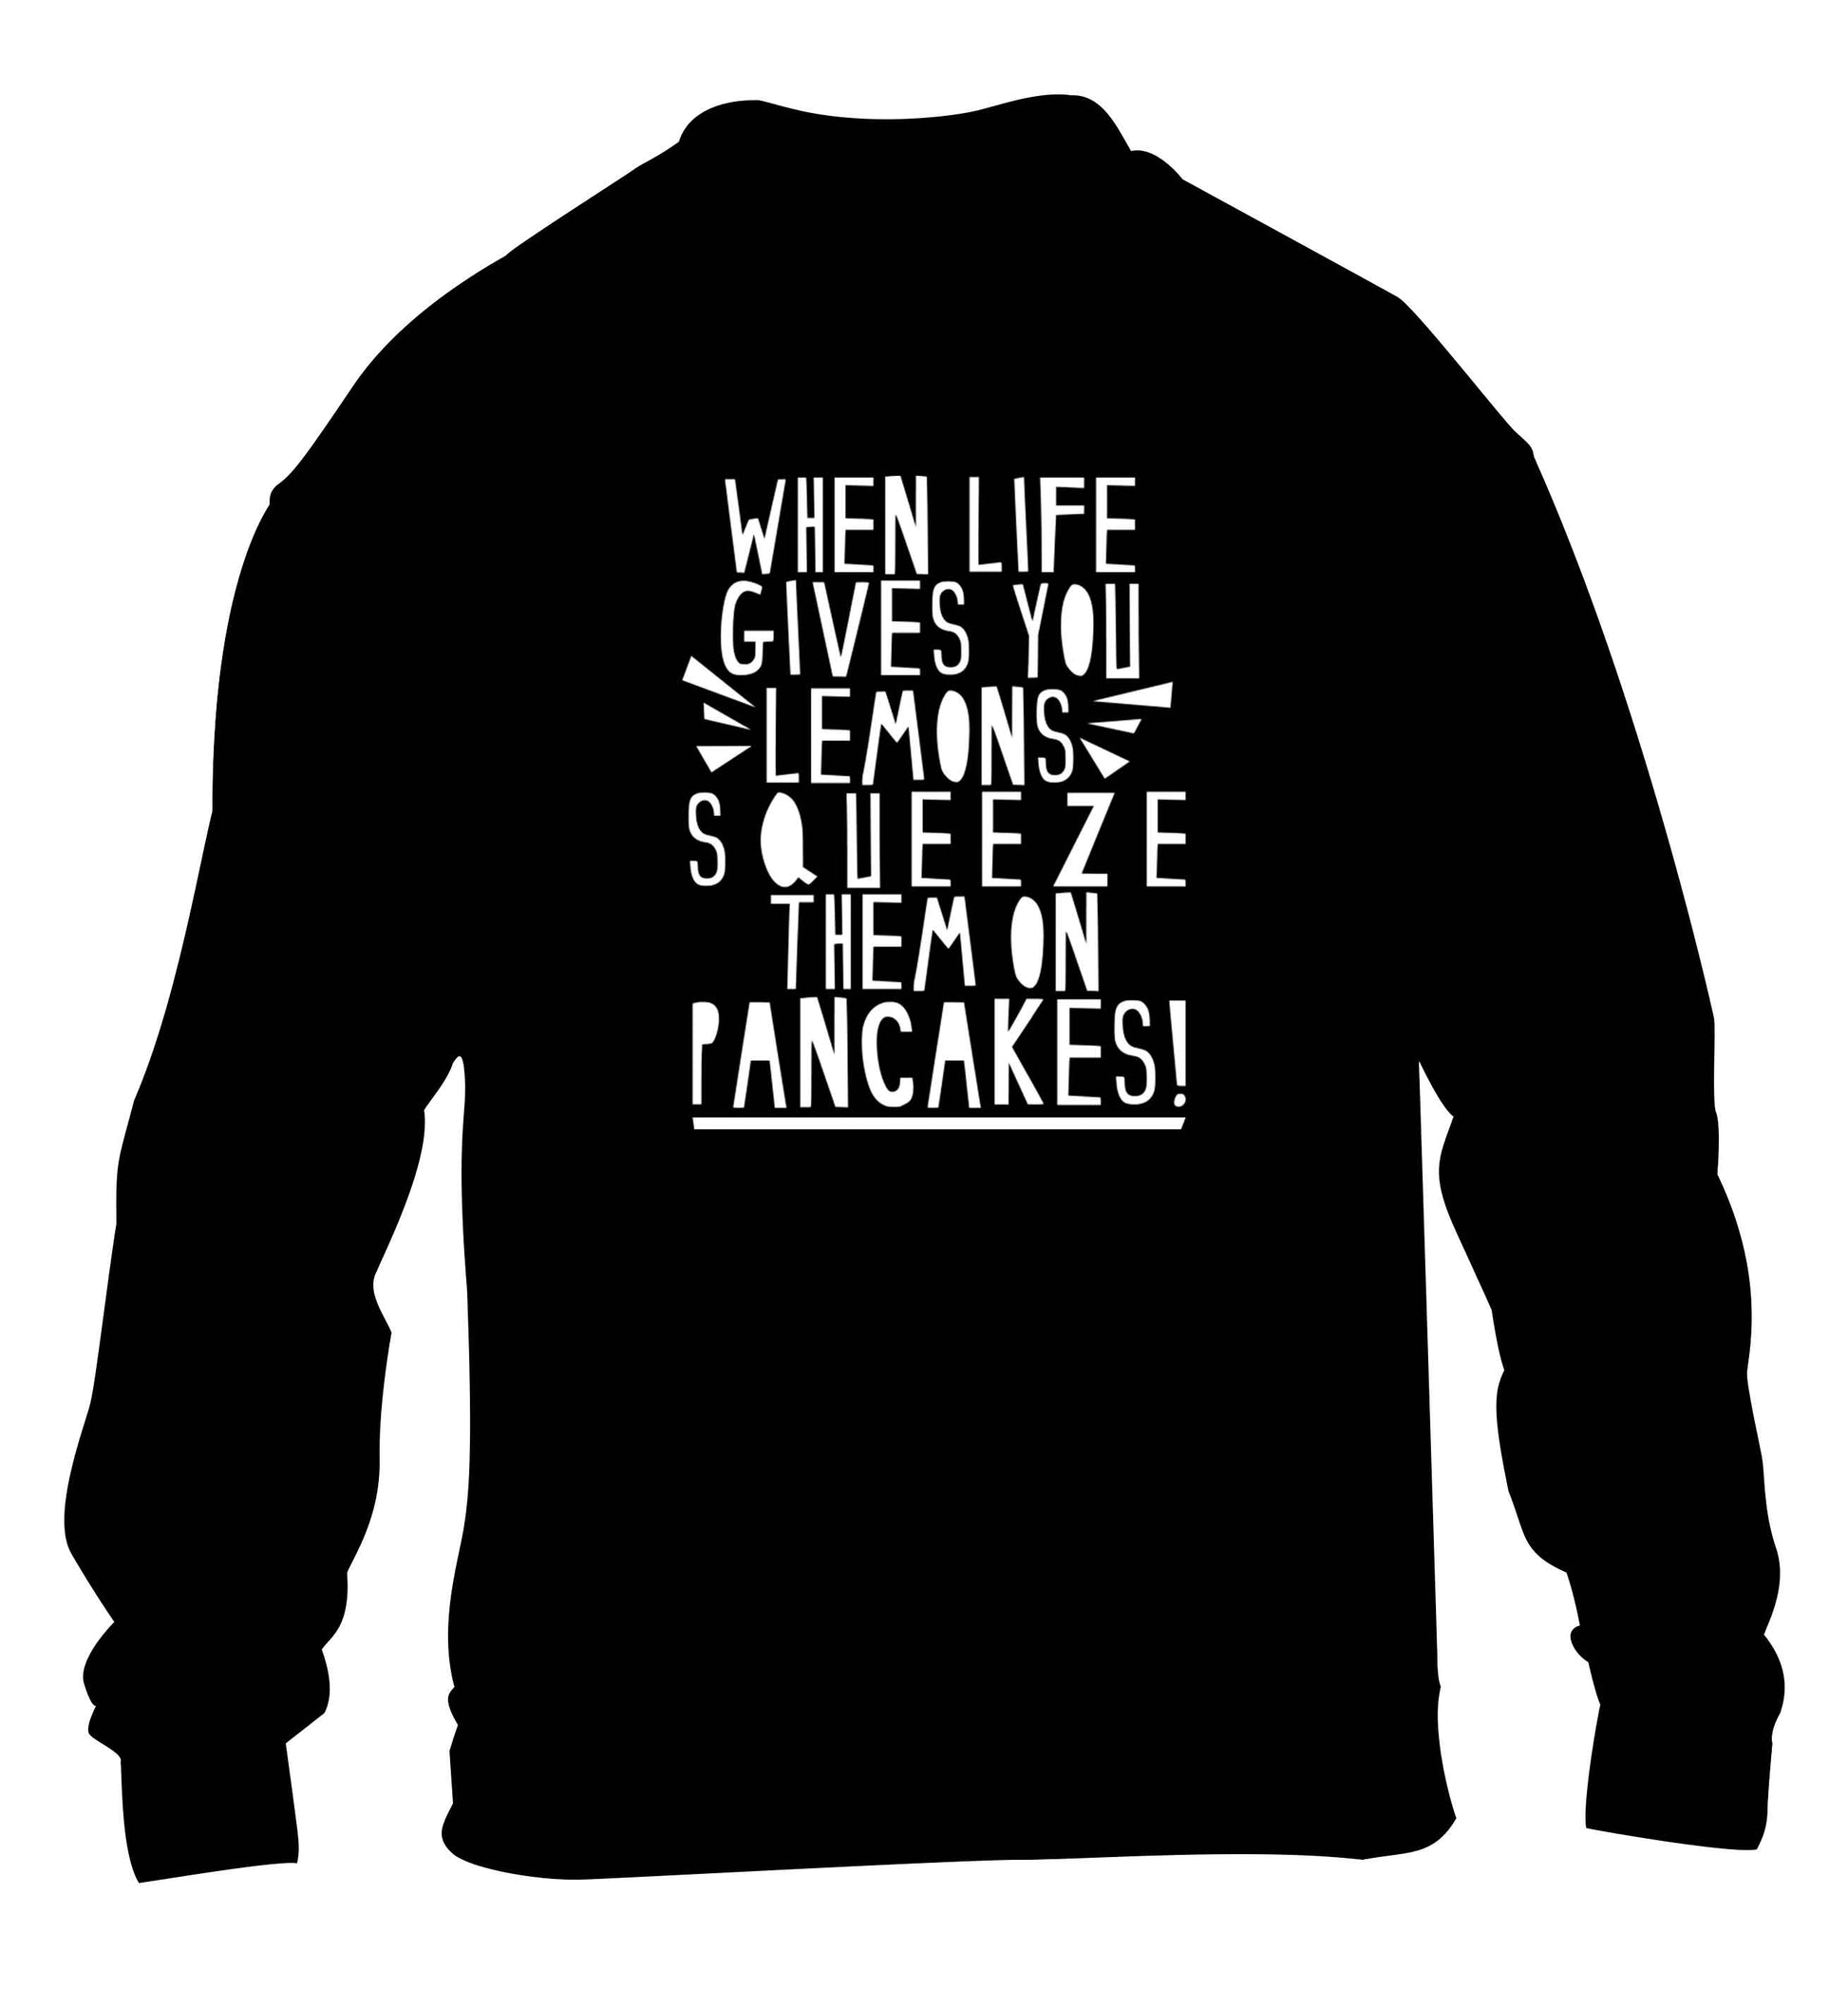 When life gives you lemons squeeze them on pancakes! children's black sweater 12-13 Years